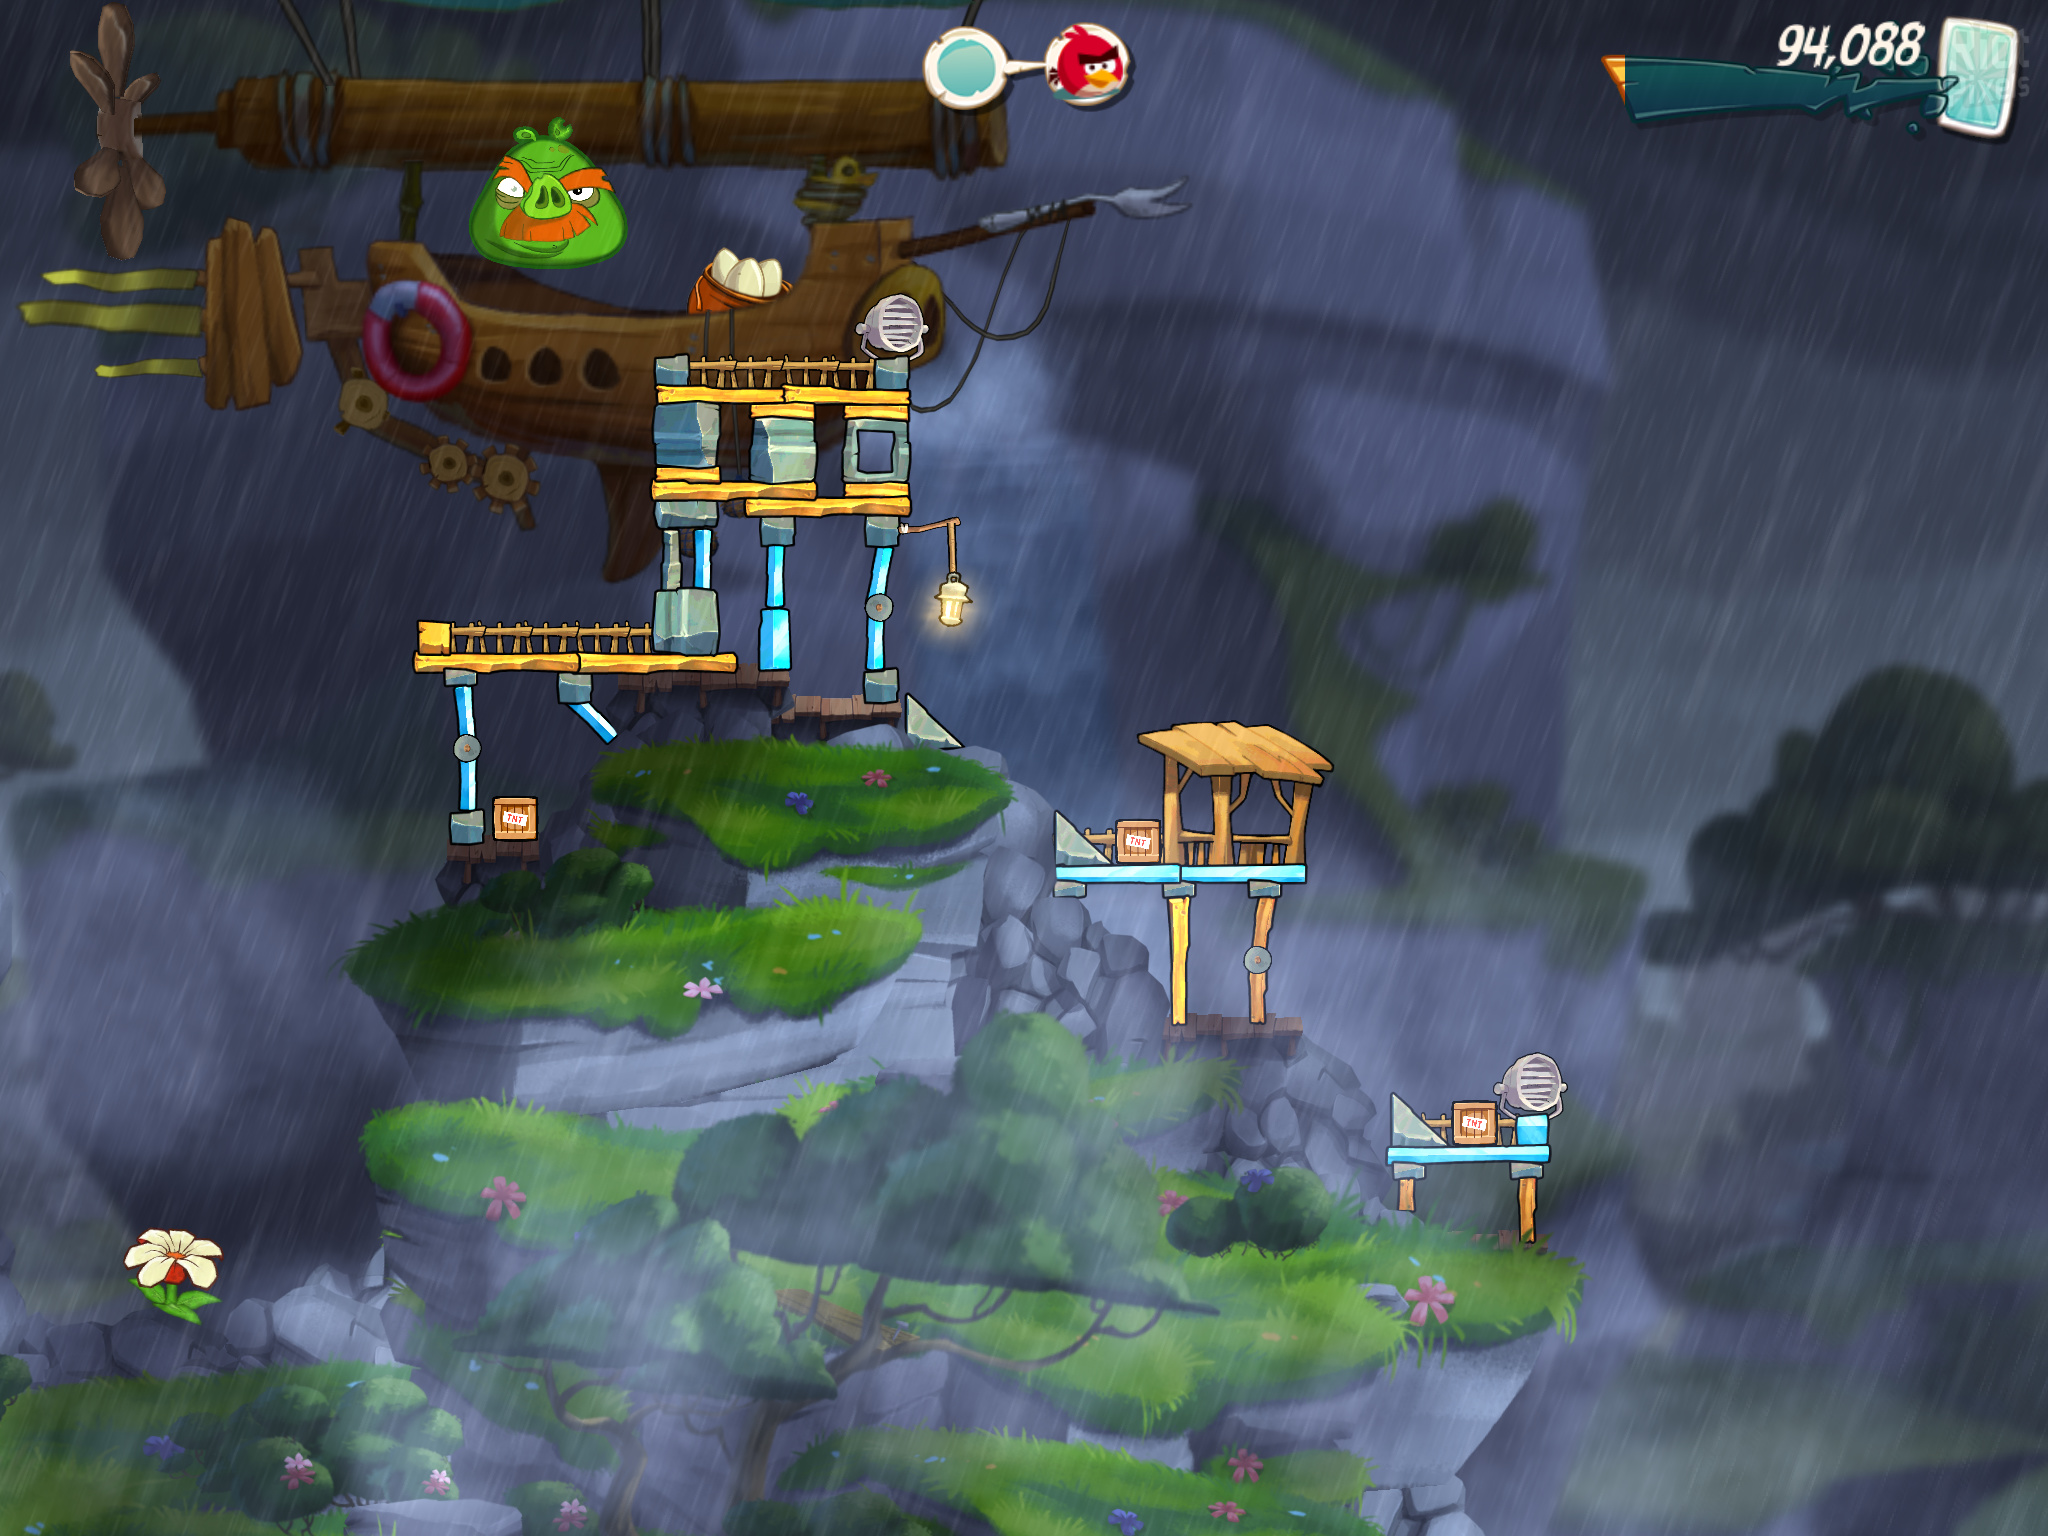 Angry Birds 2 - game screenshots at Riot Pixels, images